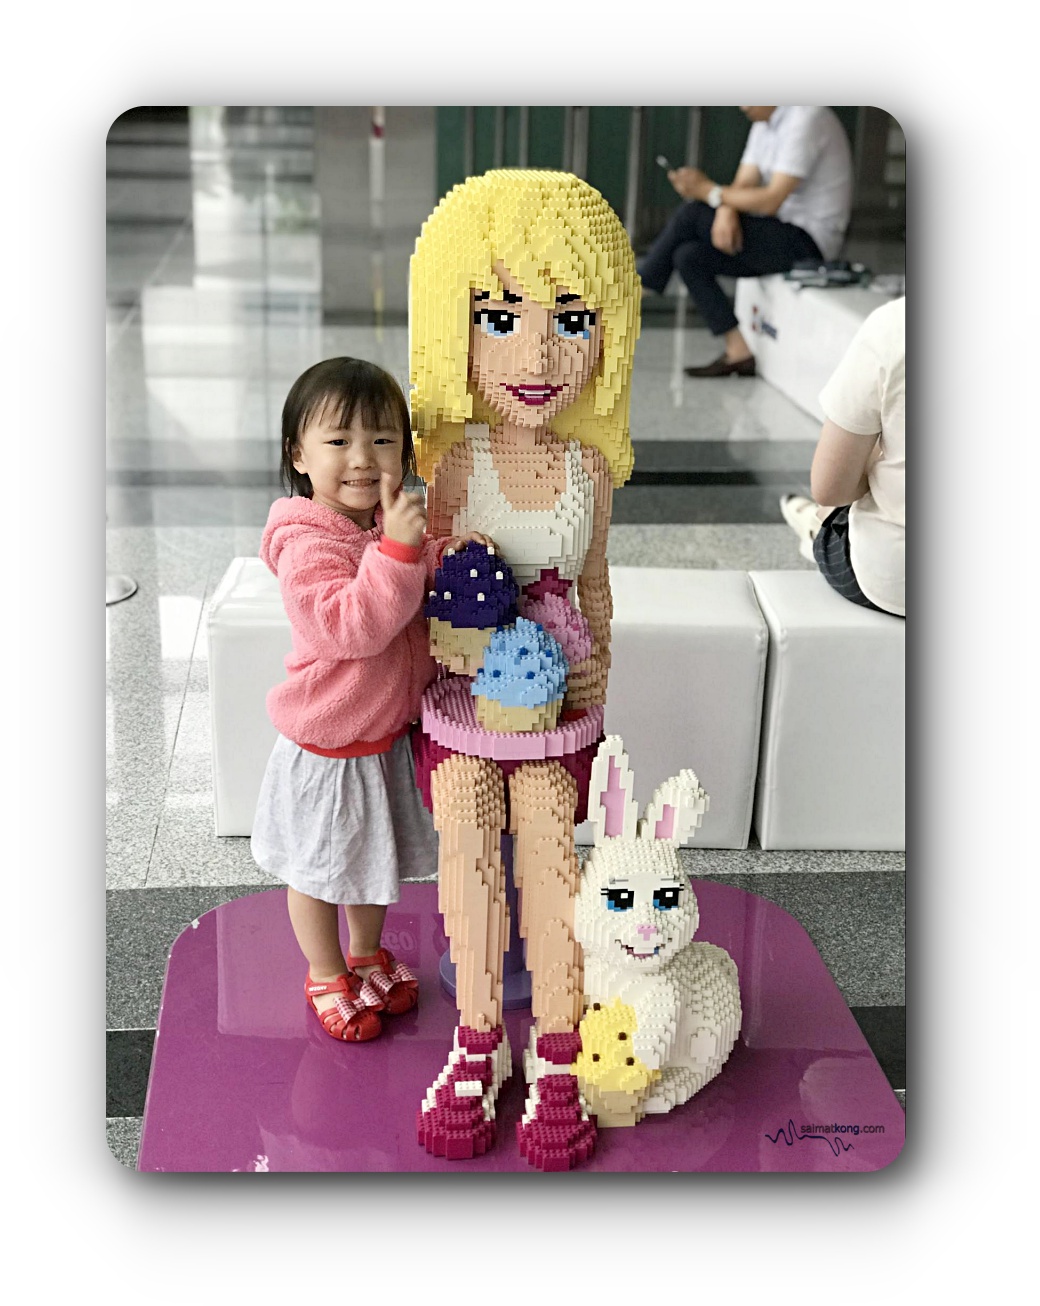 Seoul Trip 2019 Awesome Summer in Seoul - Annabelle was so happy to see Stephanie; one of the characters from Lego Friends. 